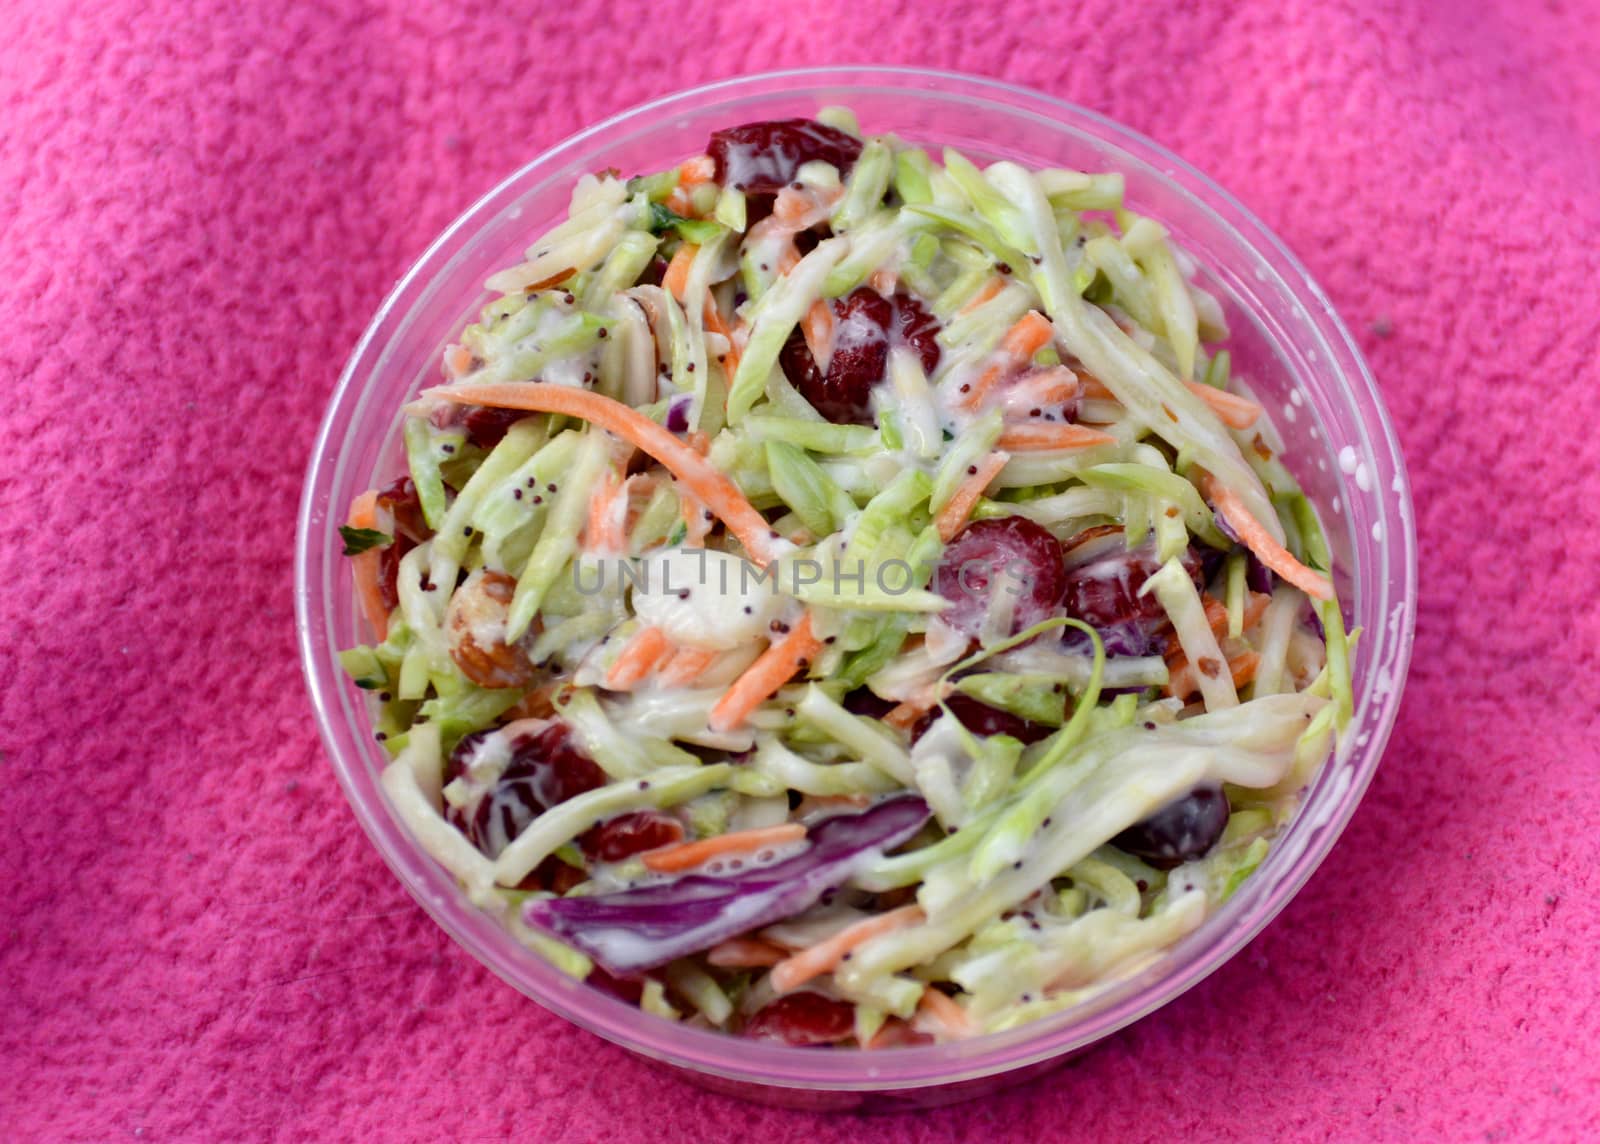 close-up of coleslaw in a to-go container